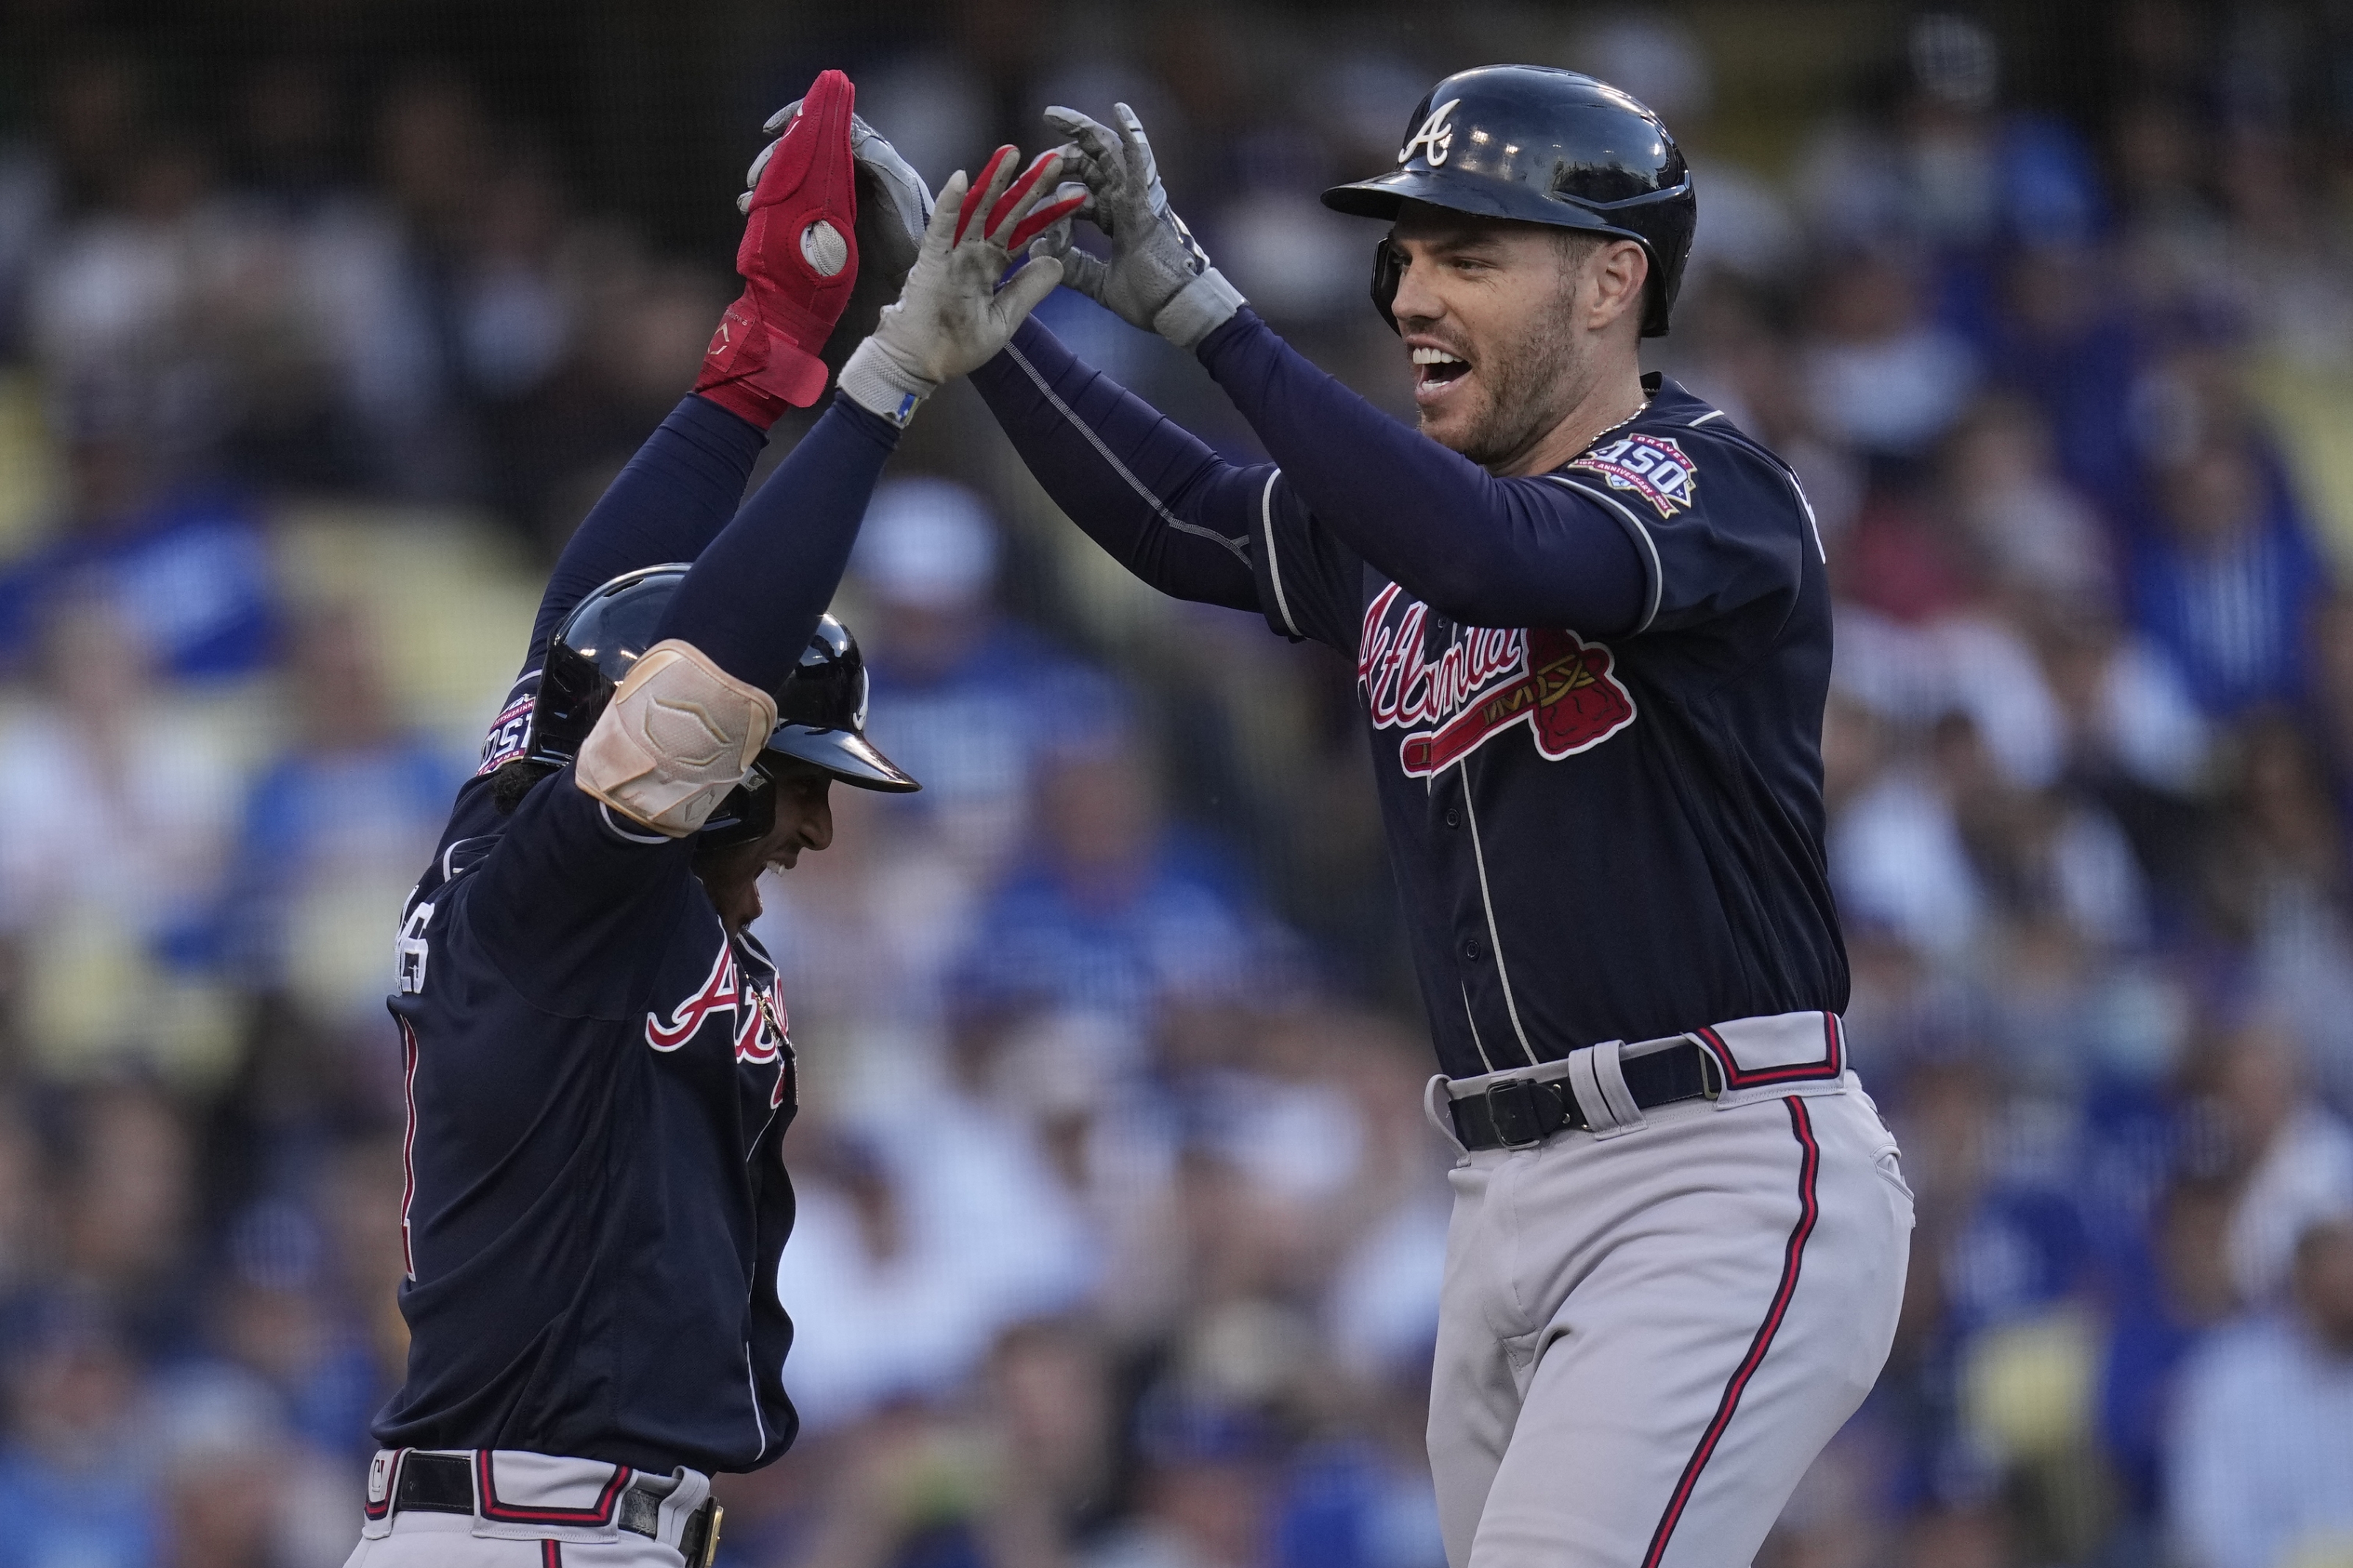 Braves vs Astros: A World Series 6 decades in the making - WTOP News